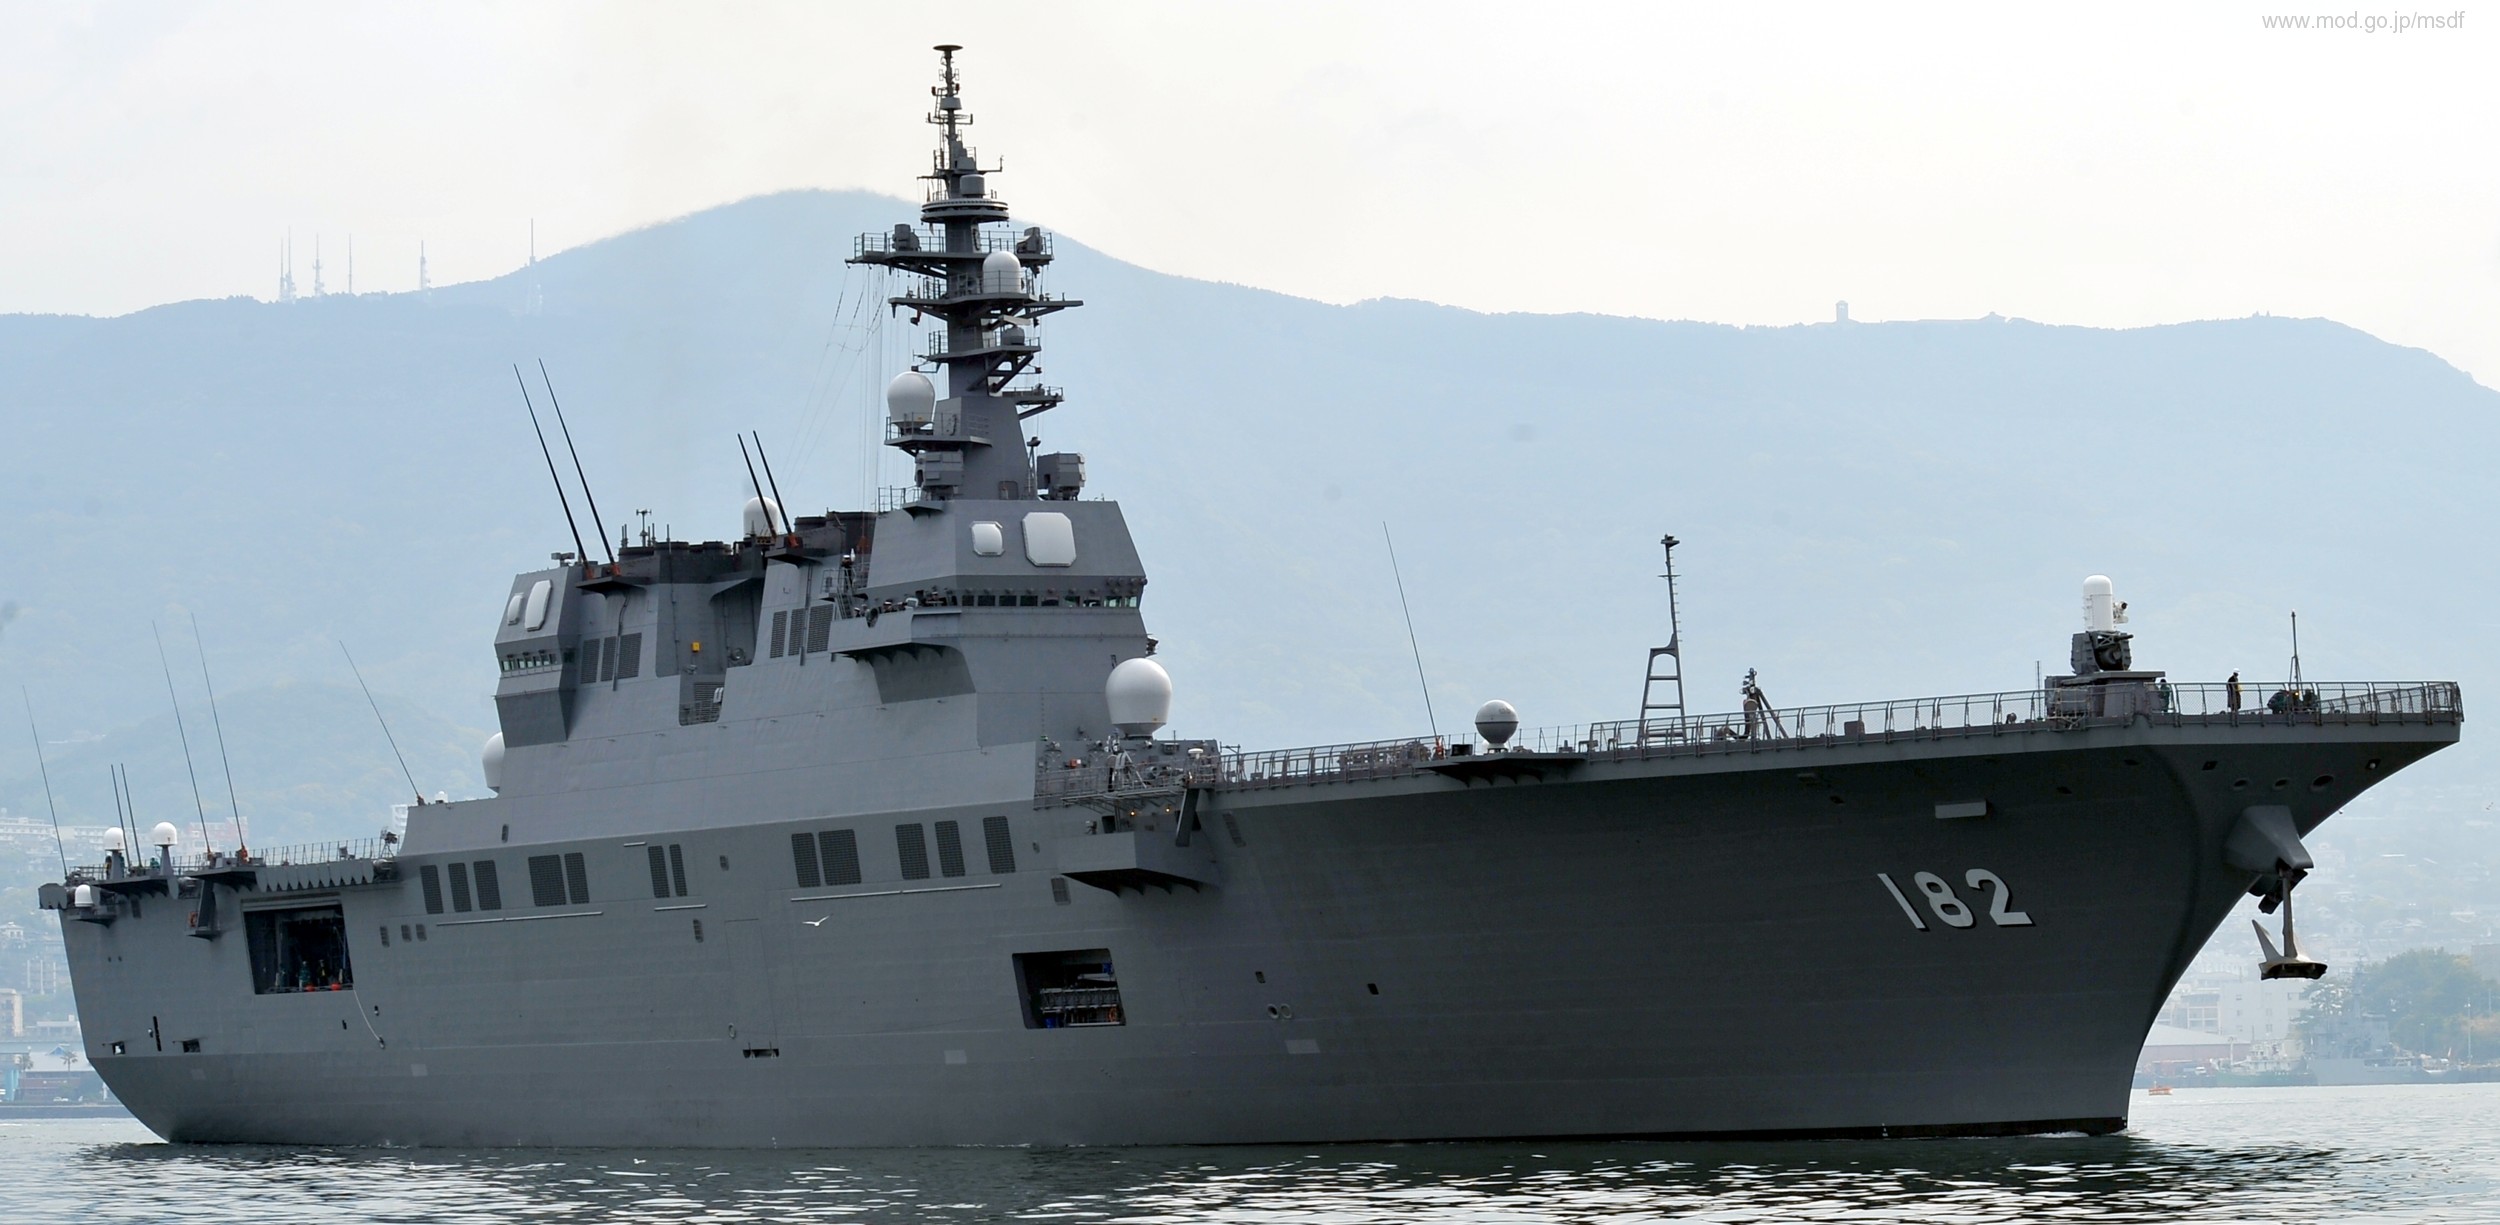 ddh-182 jds ise hyuga class helicopter destroyer japan maritime self defense force jmsdf 20